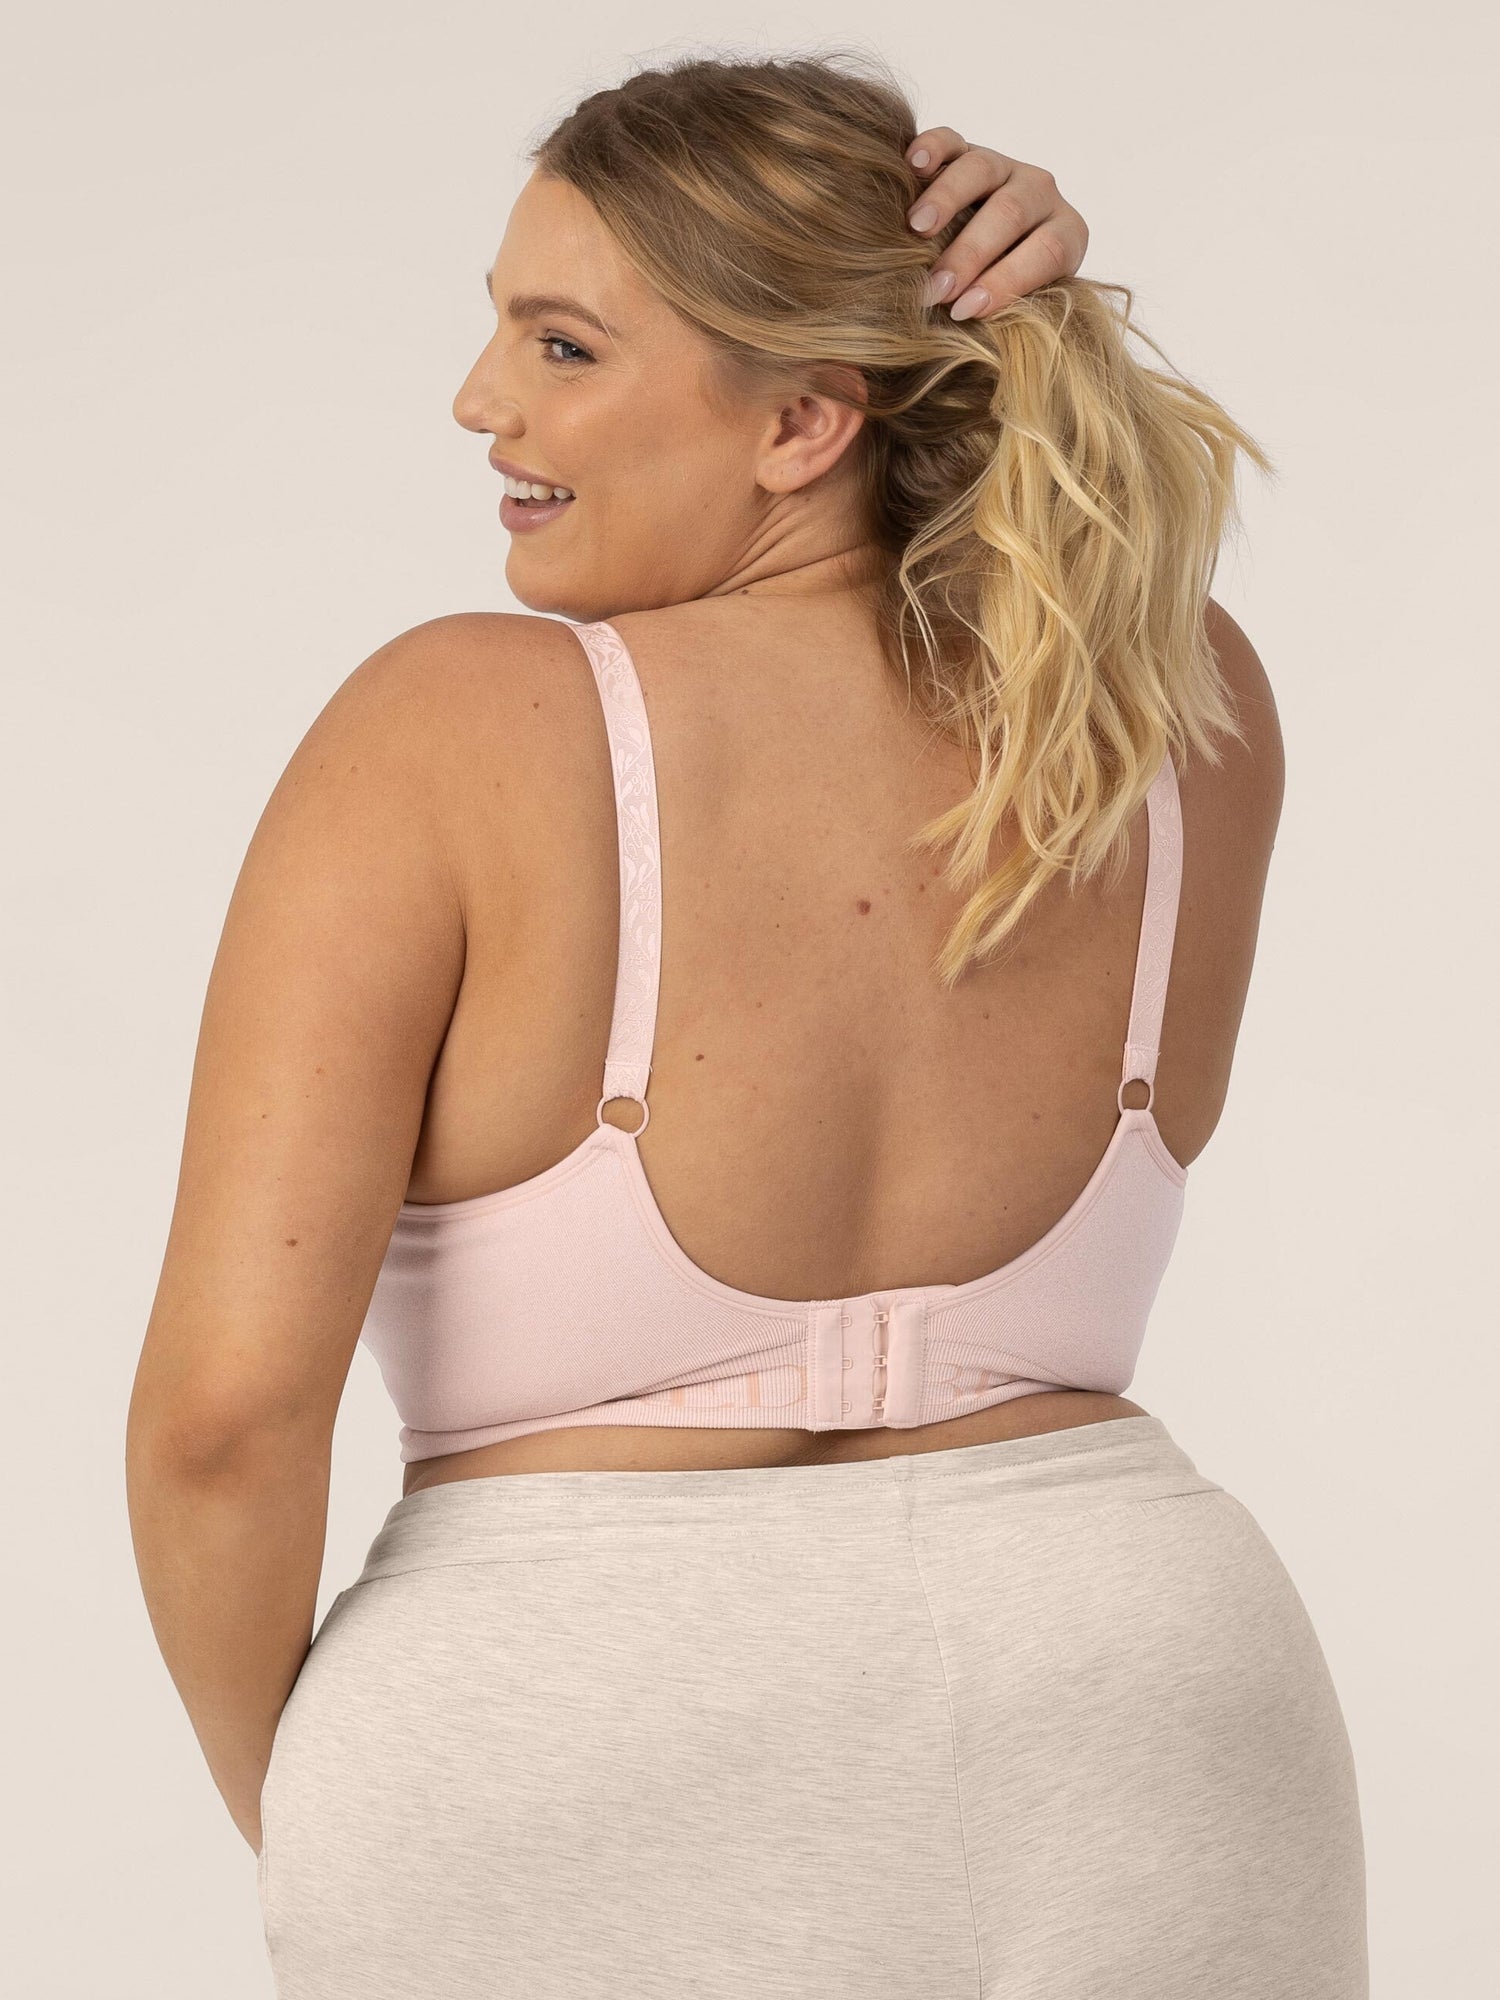 Busty model looking over her shoulder and pulling her hair back wearing the Sublime® Hands-Free Pumping & Nursing Bra in Pink Heather